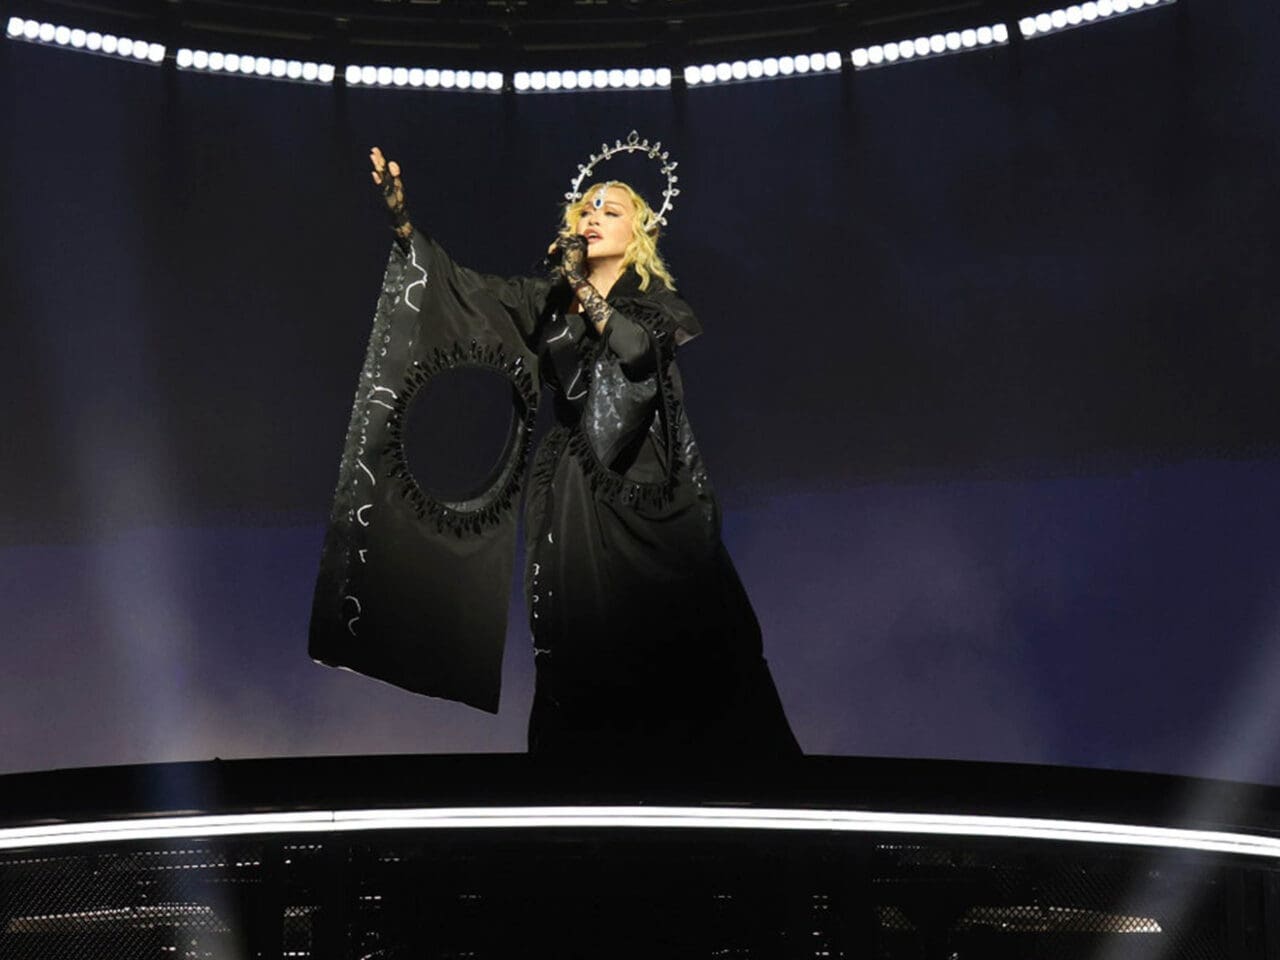 A Closer Look at Madonna’s One-of-a-Kind Celebration Tour Wardrobe